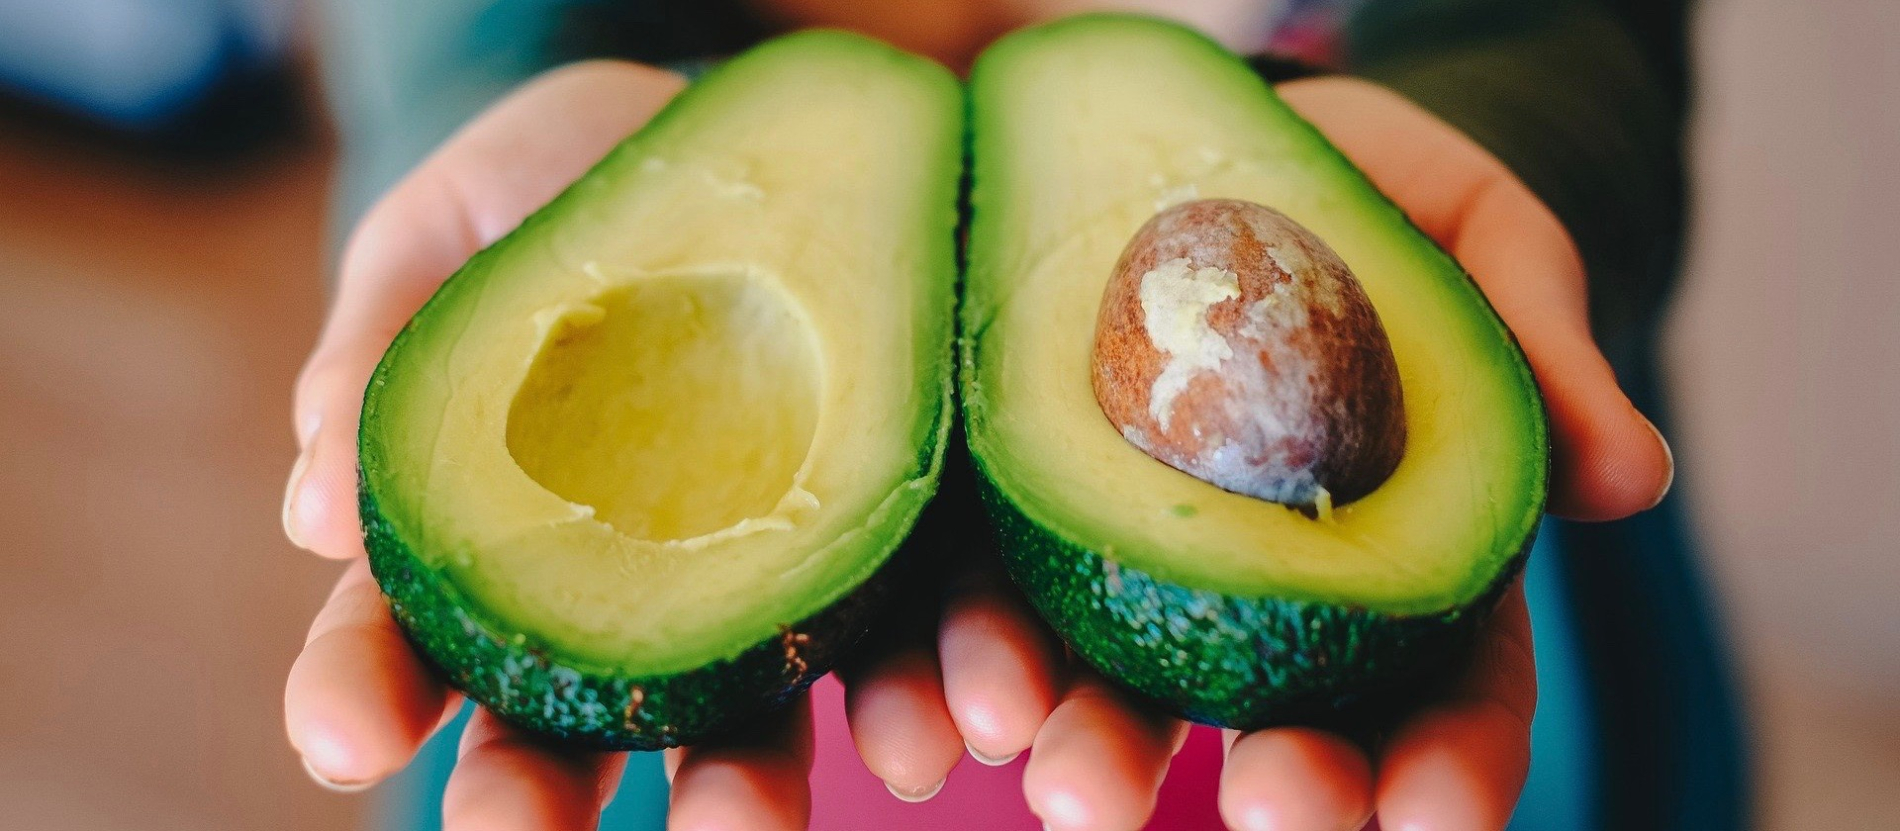 Can Avocados Lower My Cholesterol? | Office for Science and Society - McGill University